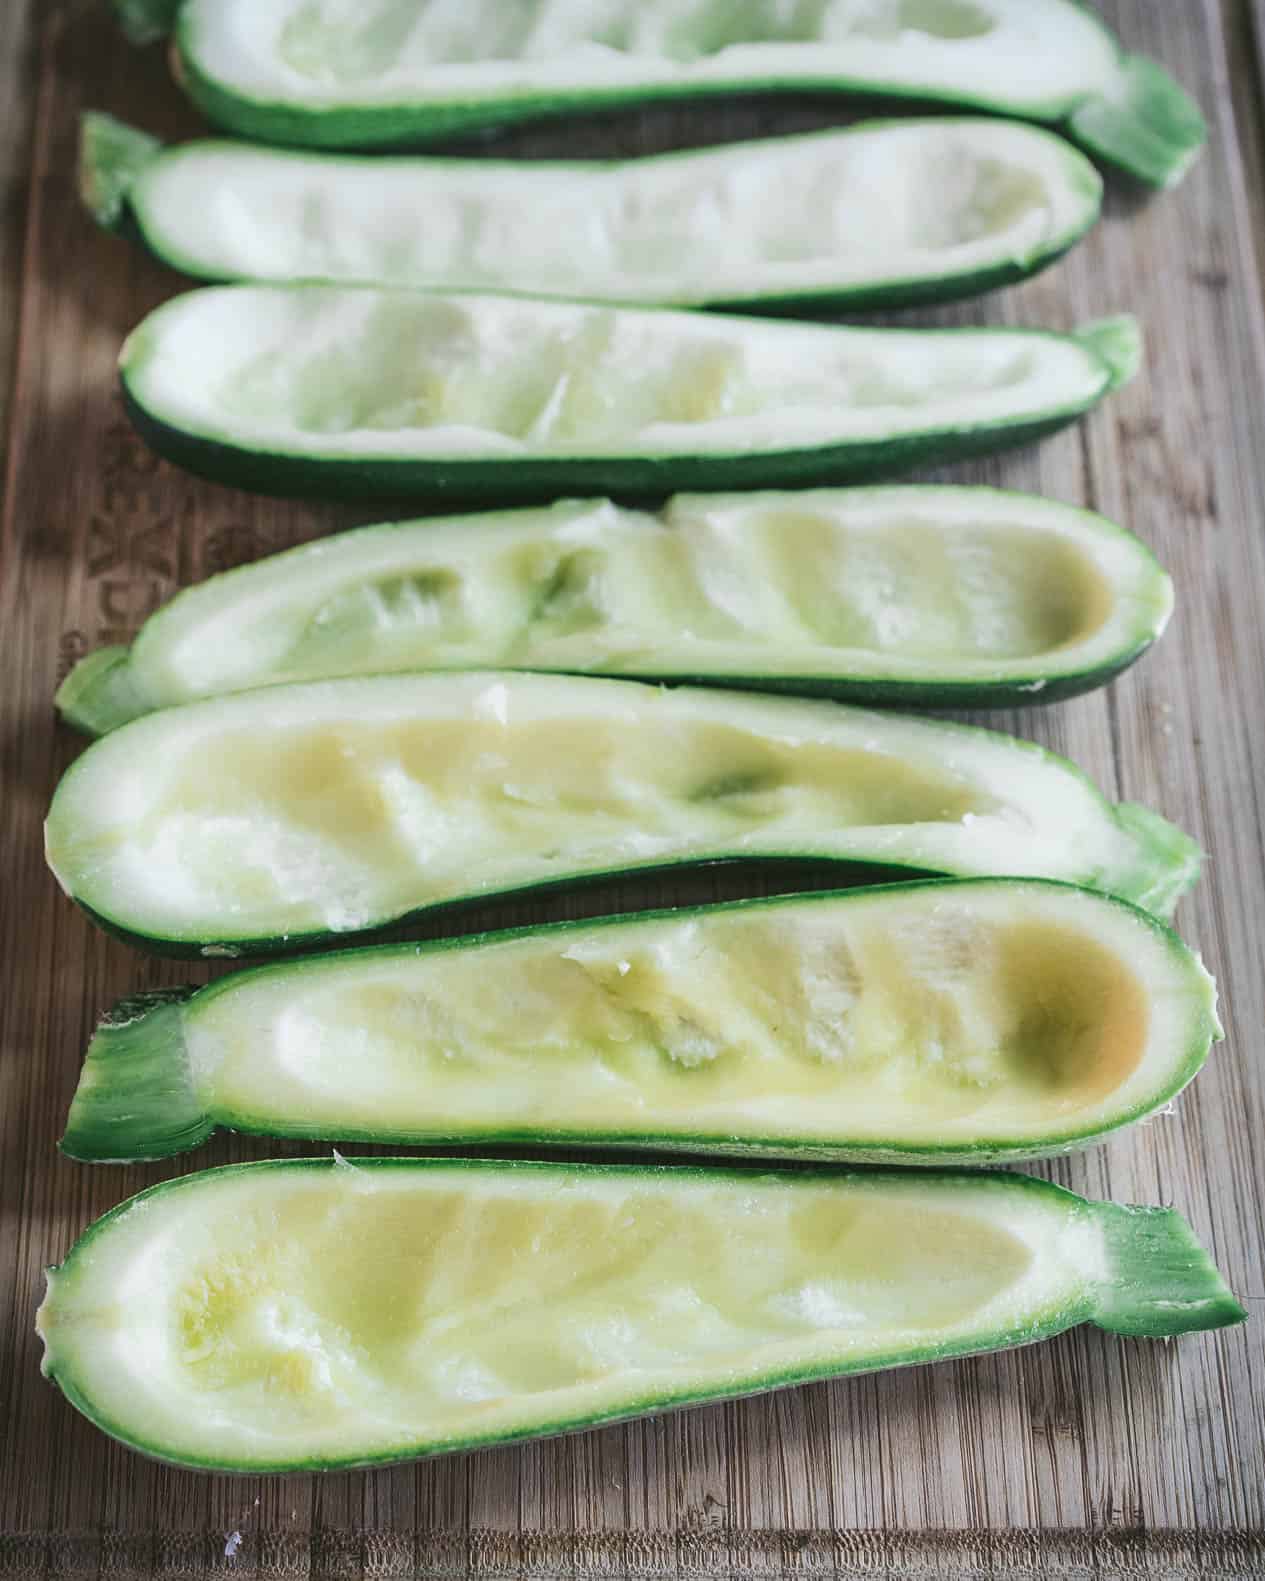 zucchini halves with the seeds scooped out to make boats on a wooden cutting board.